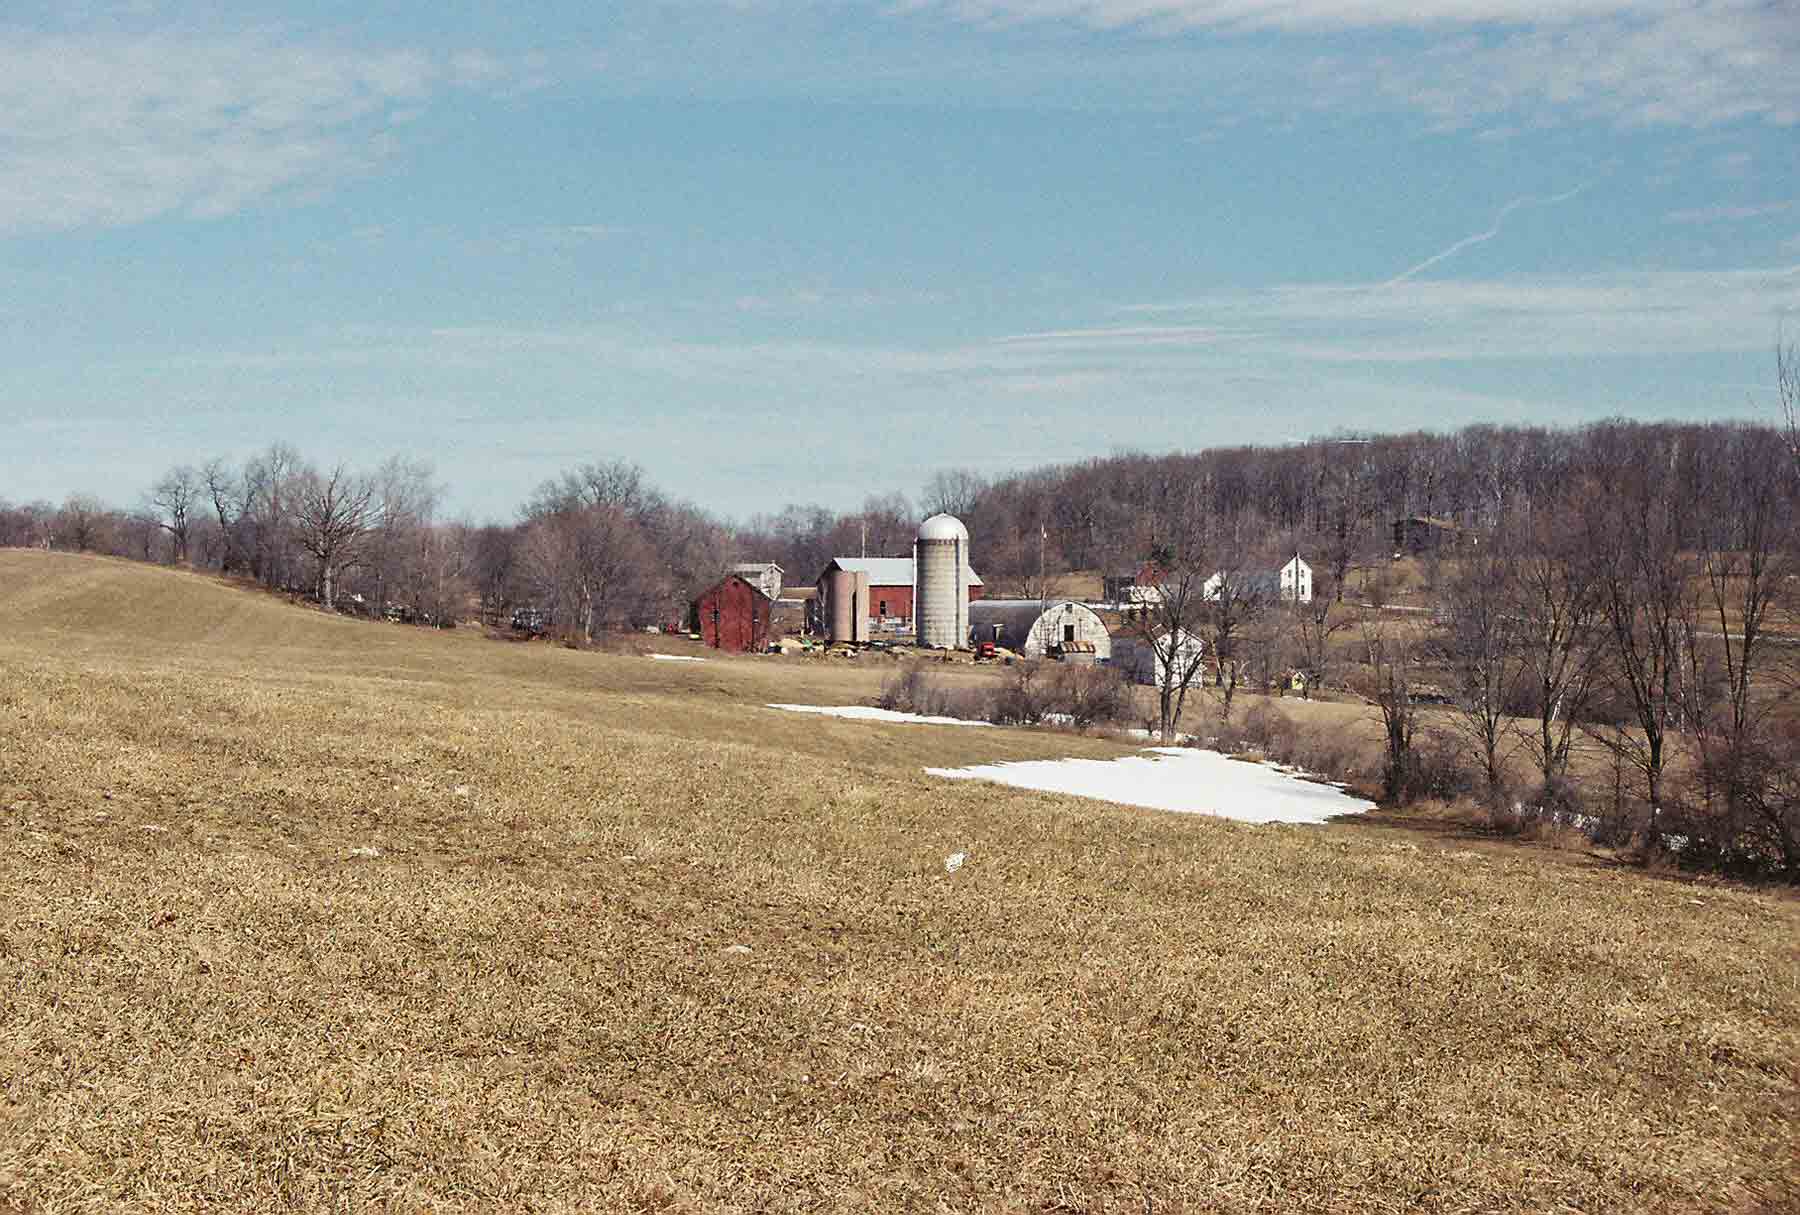 Farm near AT in northern New Jersey.  Courtesy dlcul@conncoll.edu